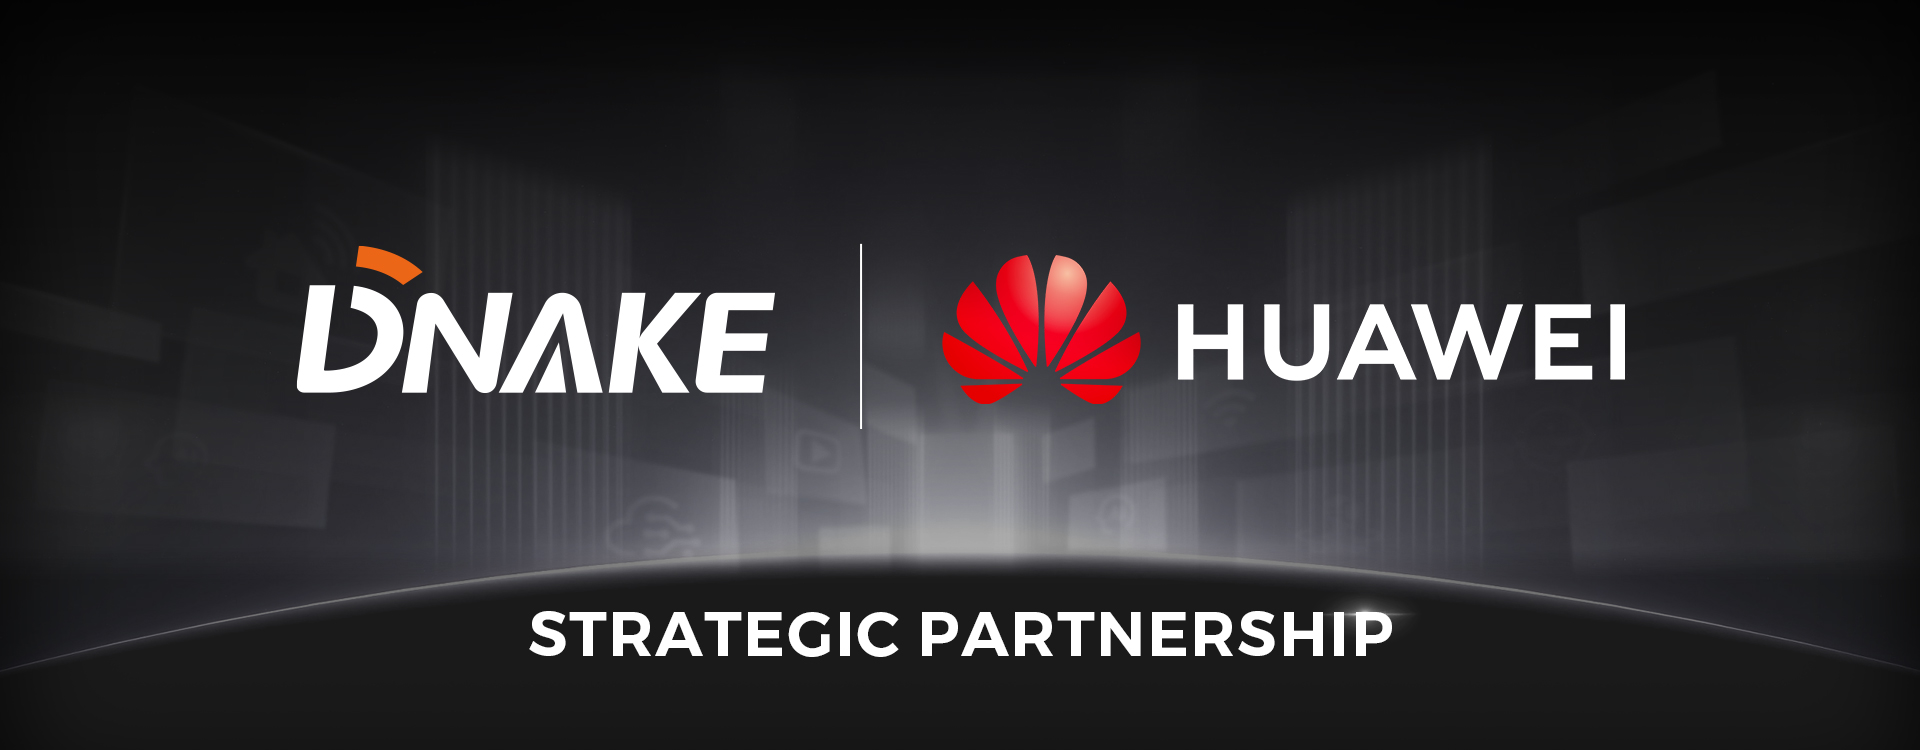 221118-Huawei-cooperation-Banner-1